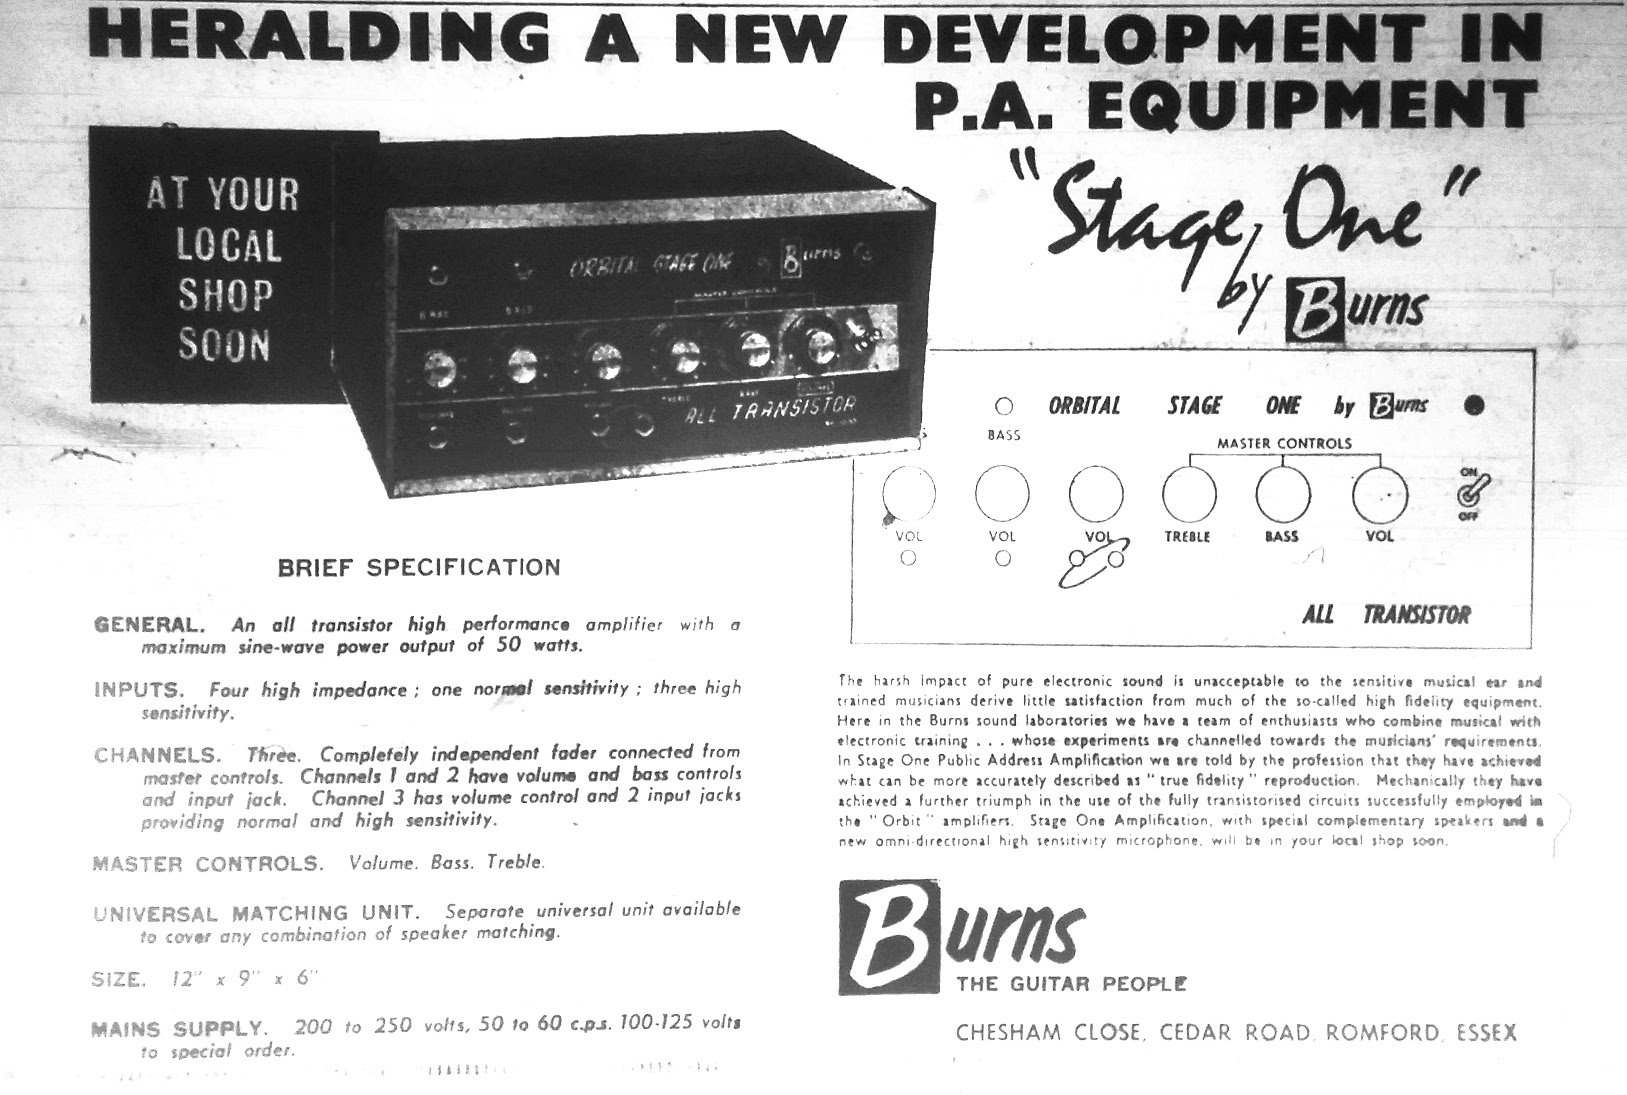 Burns Stage One advert